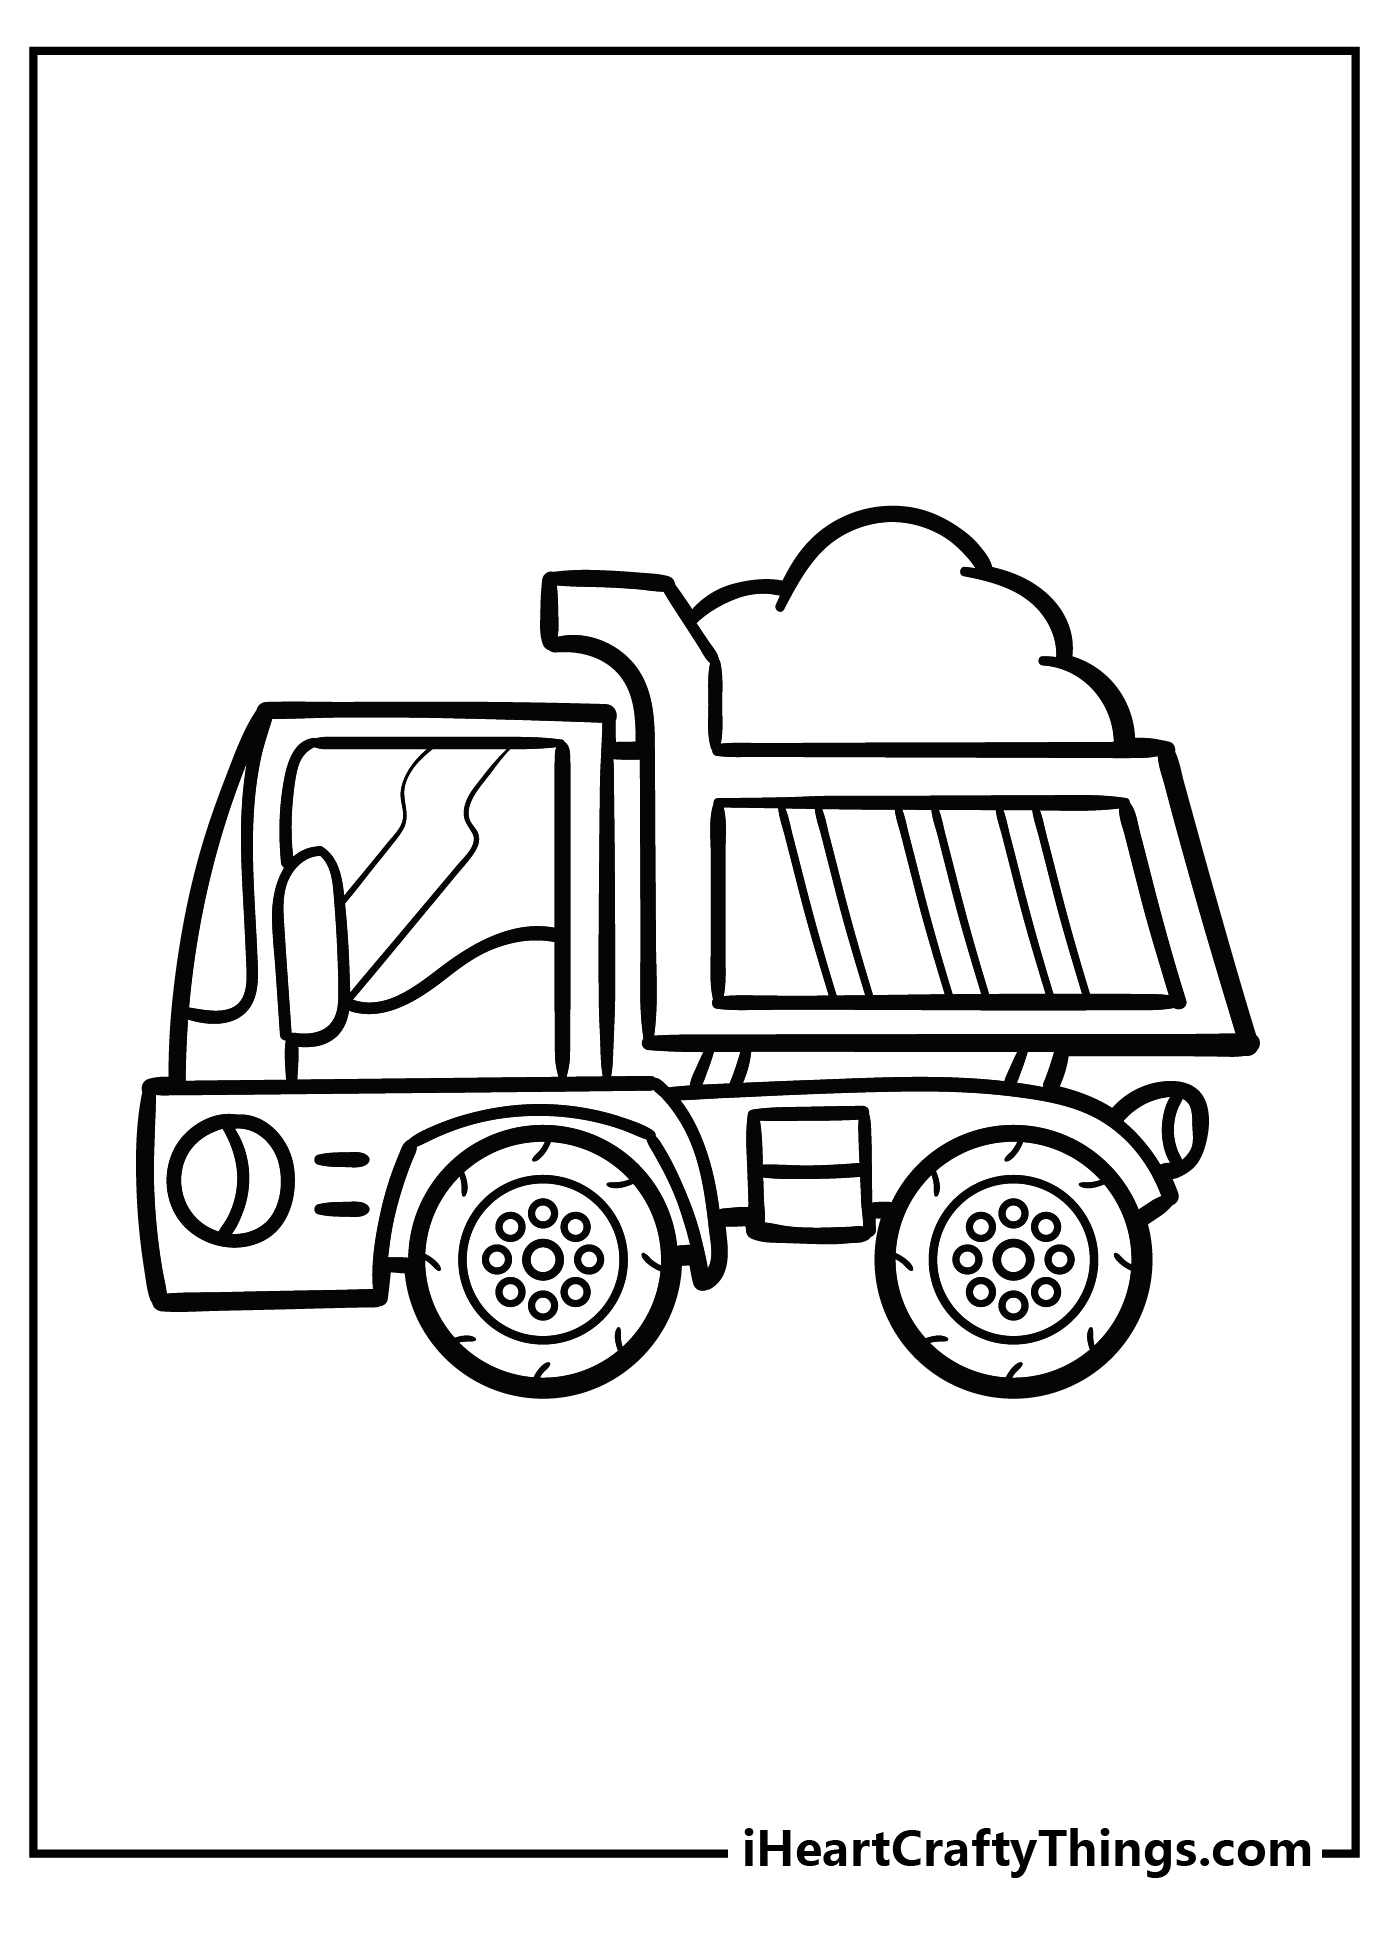 Dump Truck Coloring Pages free pdf download